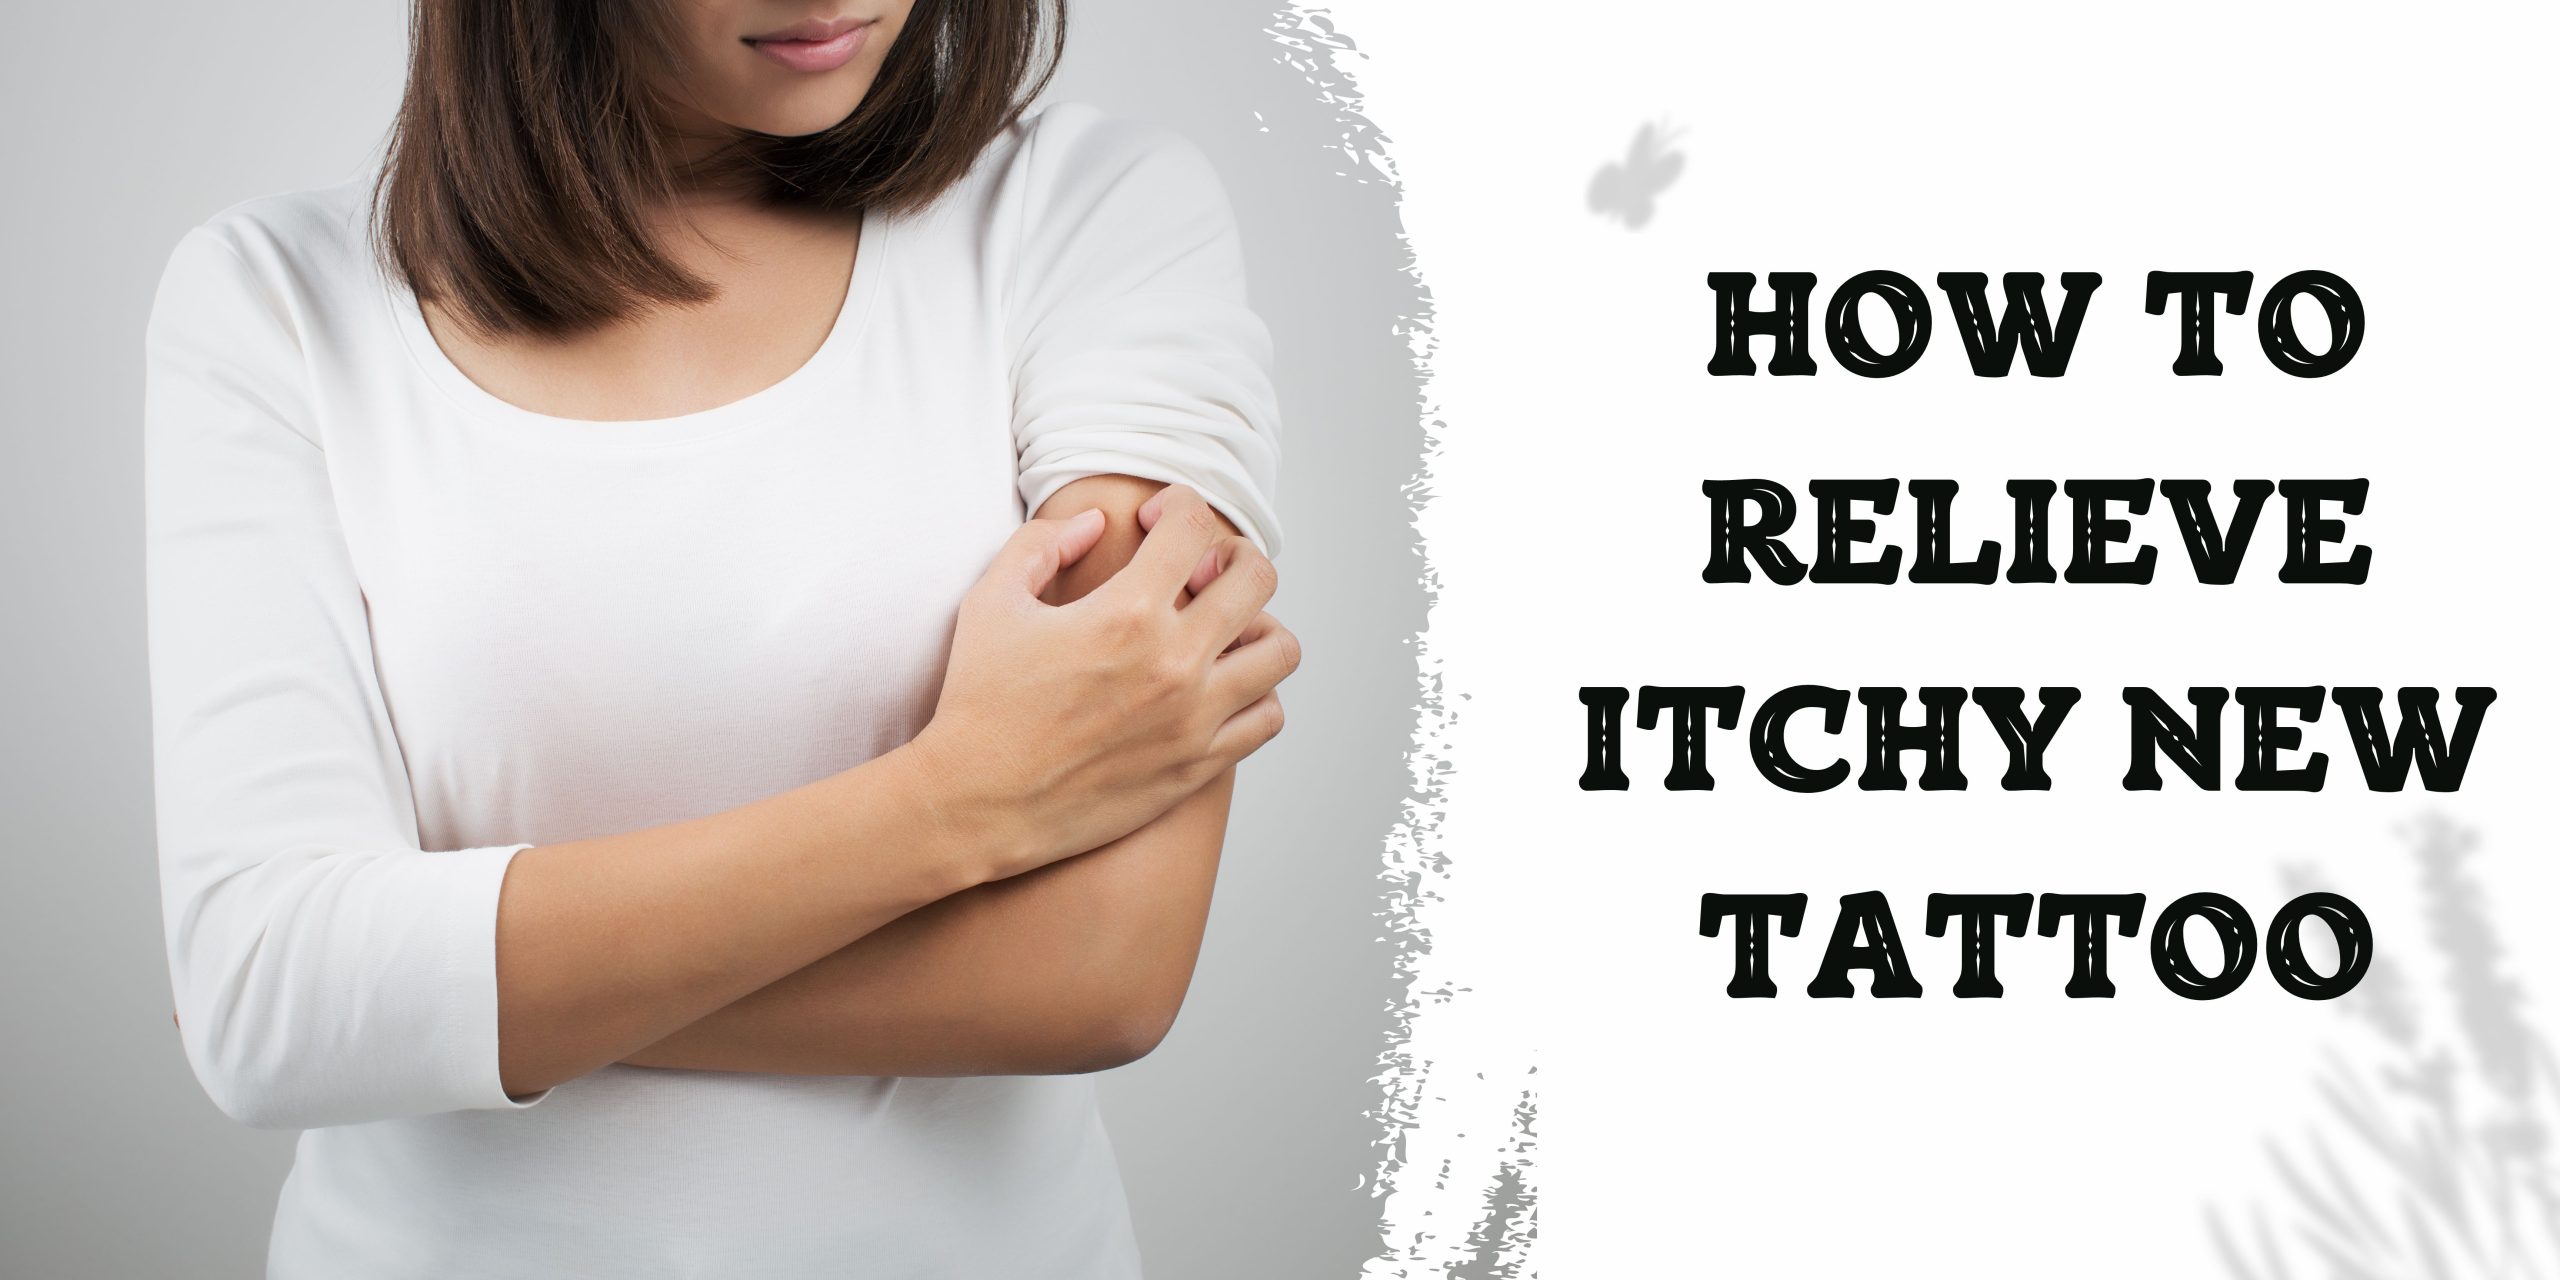 How To Relieve Itchy New Tattoo